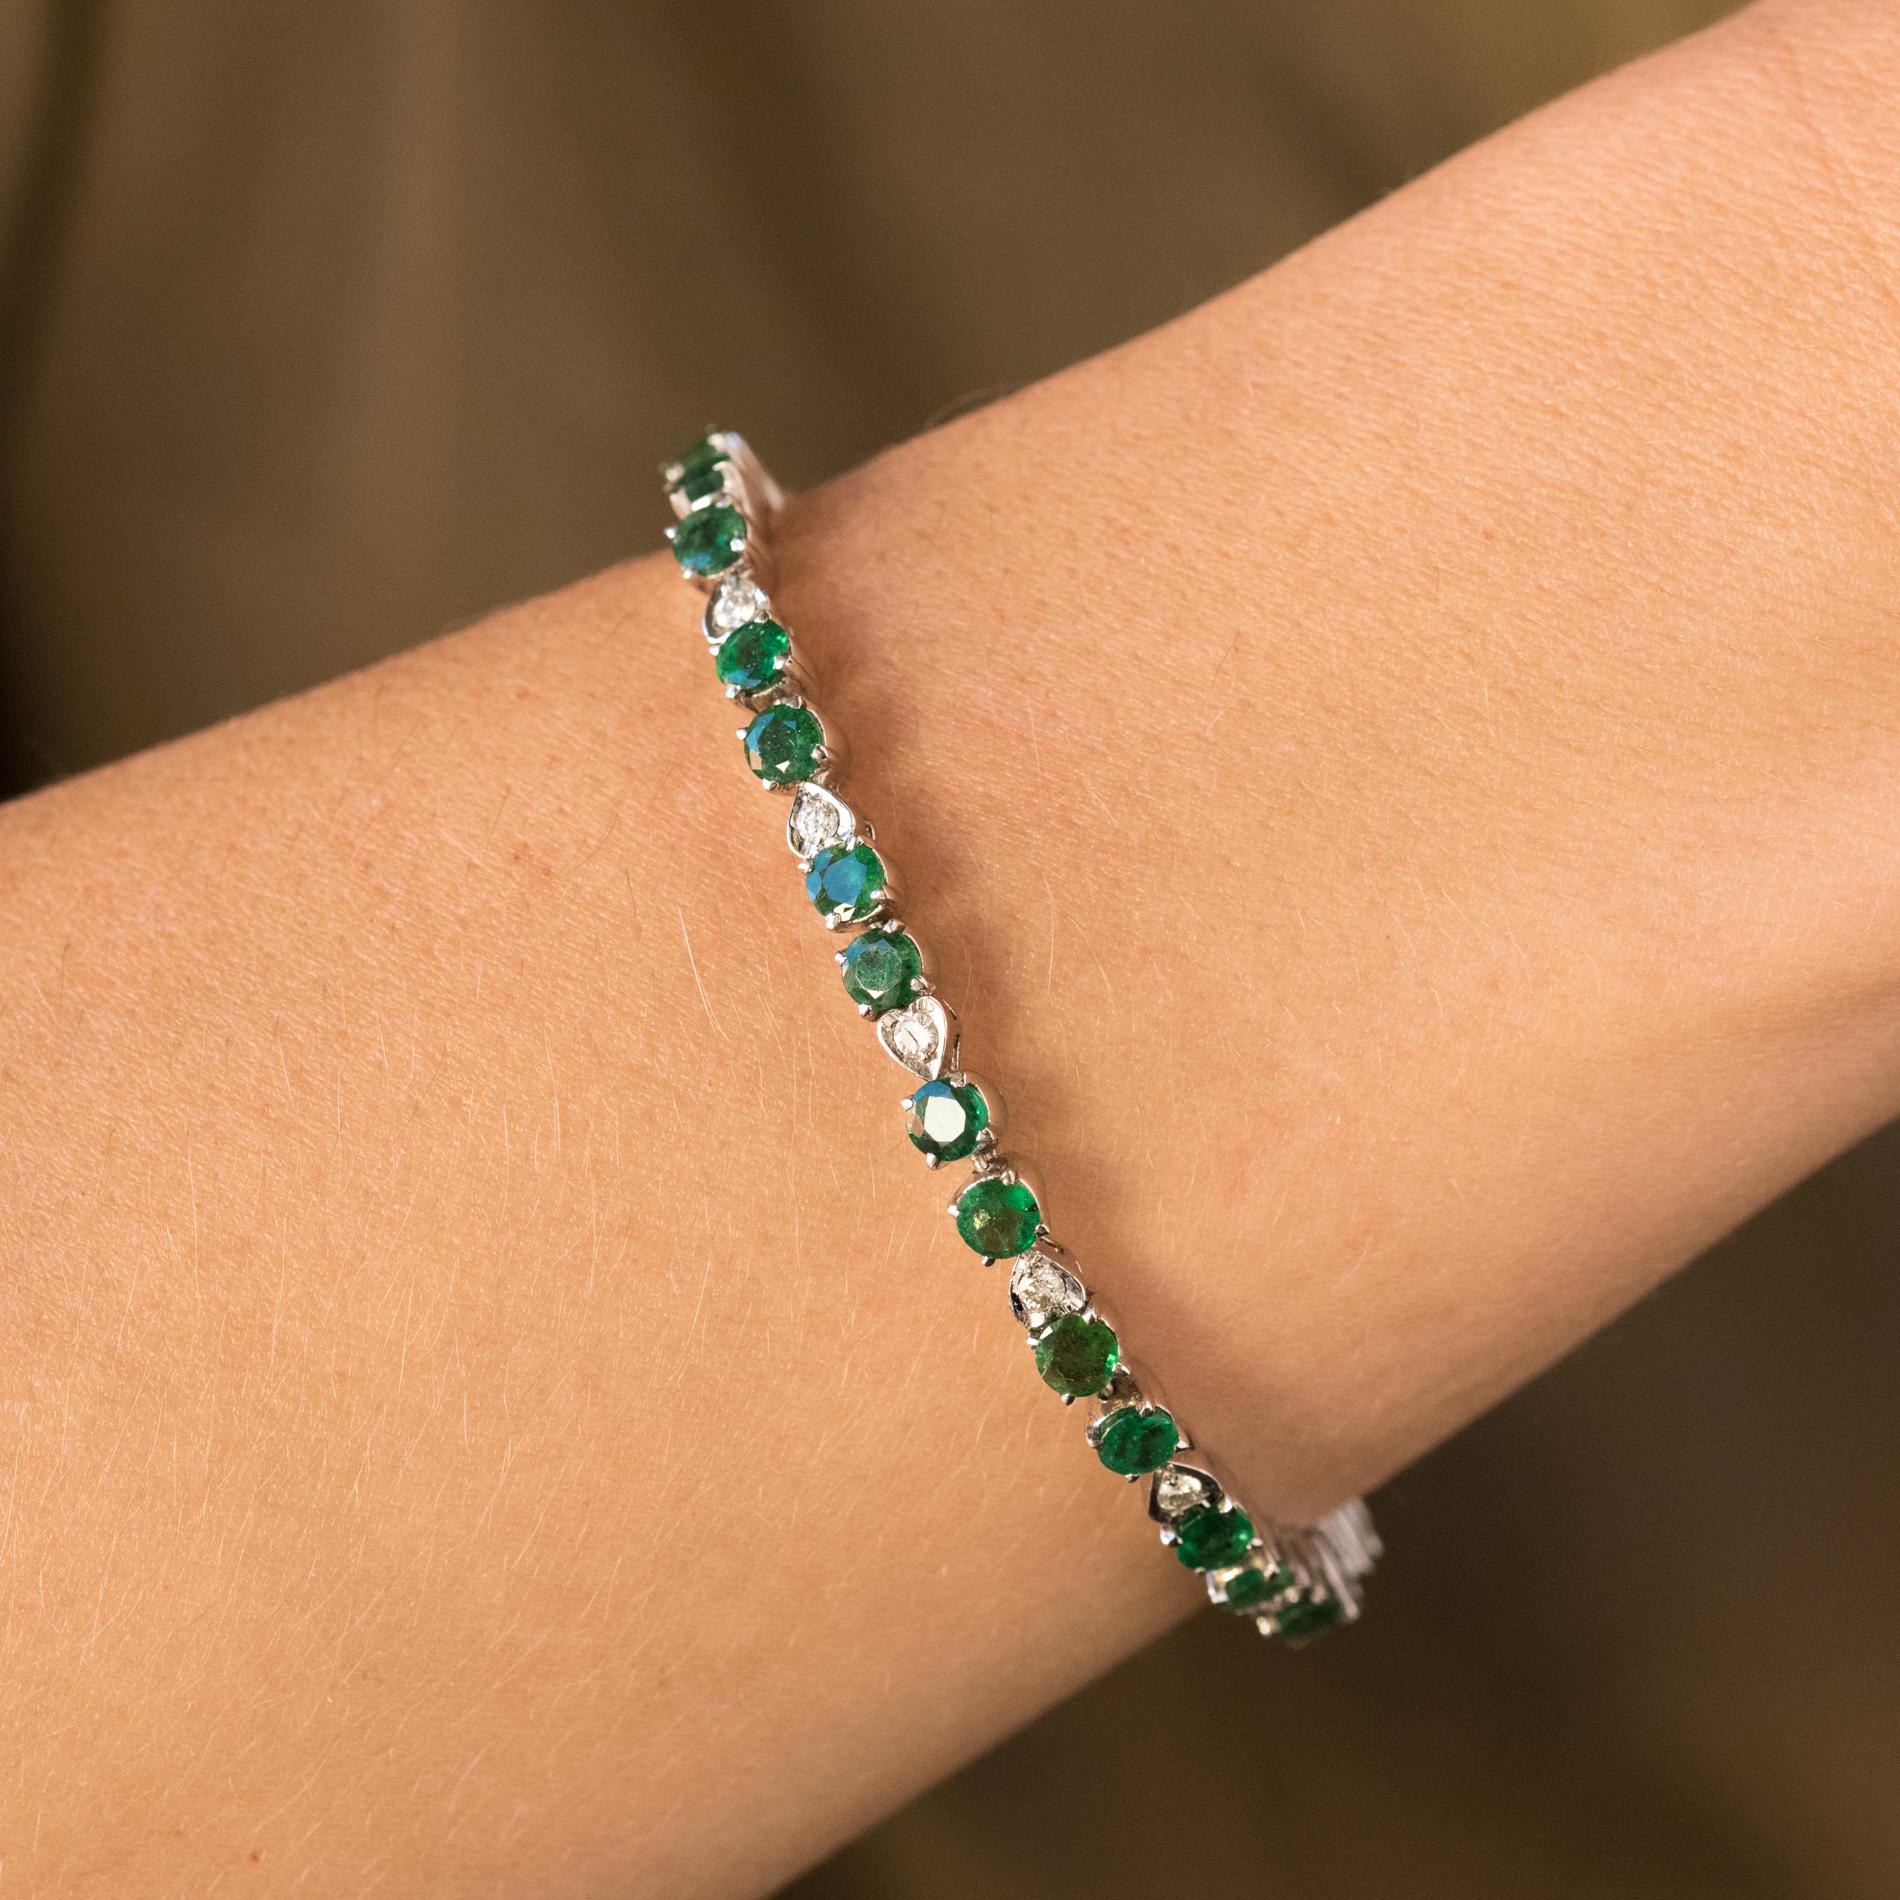 Bracelet in silver.
Composed of an articulated line, this elegant bracelet is set with an alternation of 2 round emeralds set with claws and 1 brilliant- cut diamond set within a heart-shaped pattern. The clasp is ratchet with 8 security.
Total